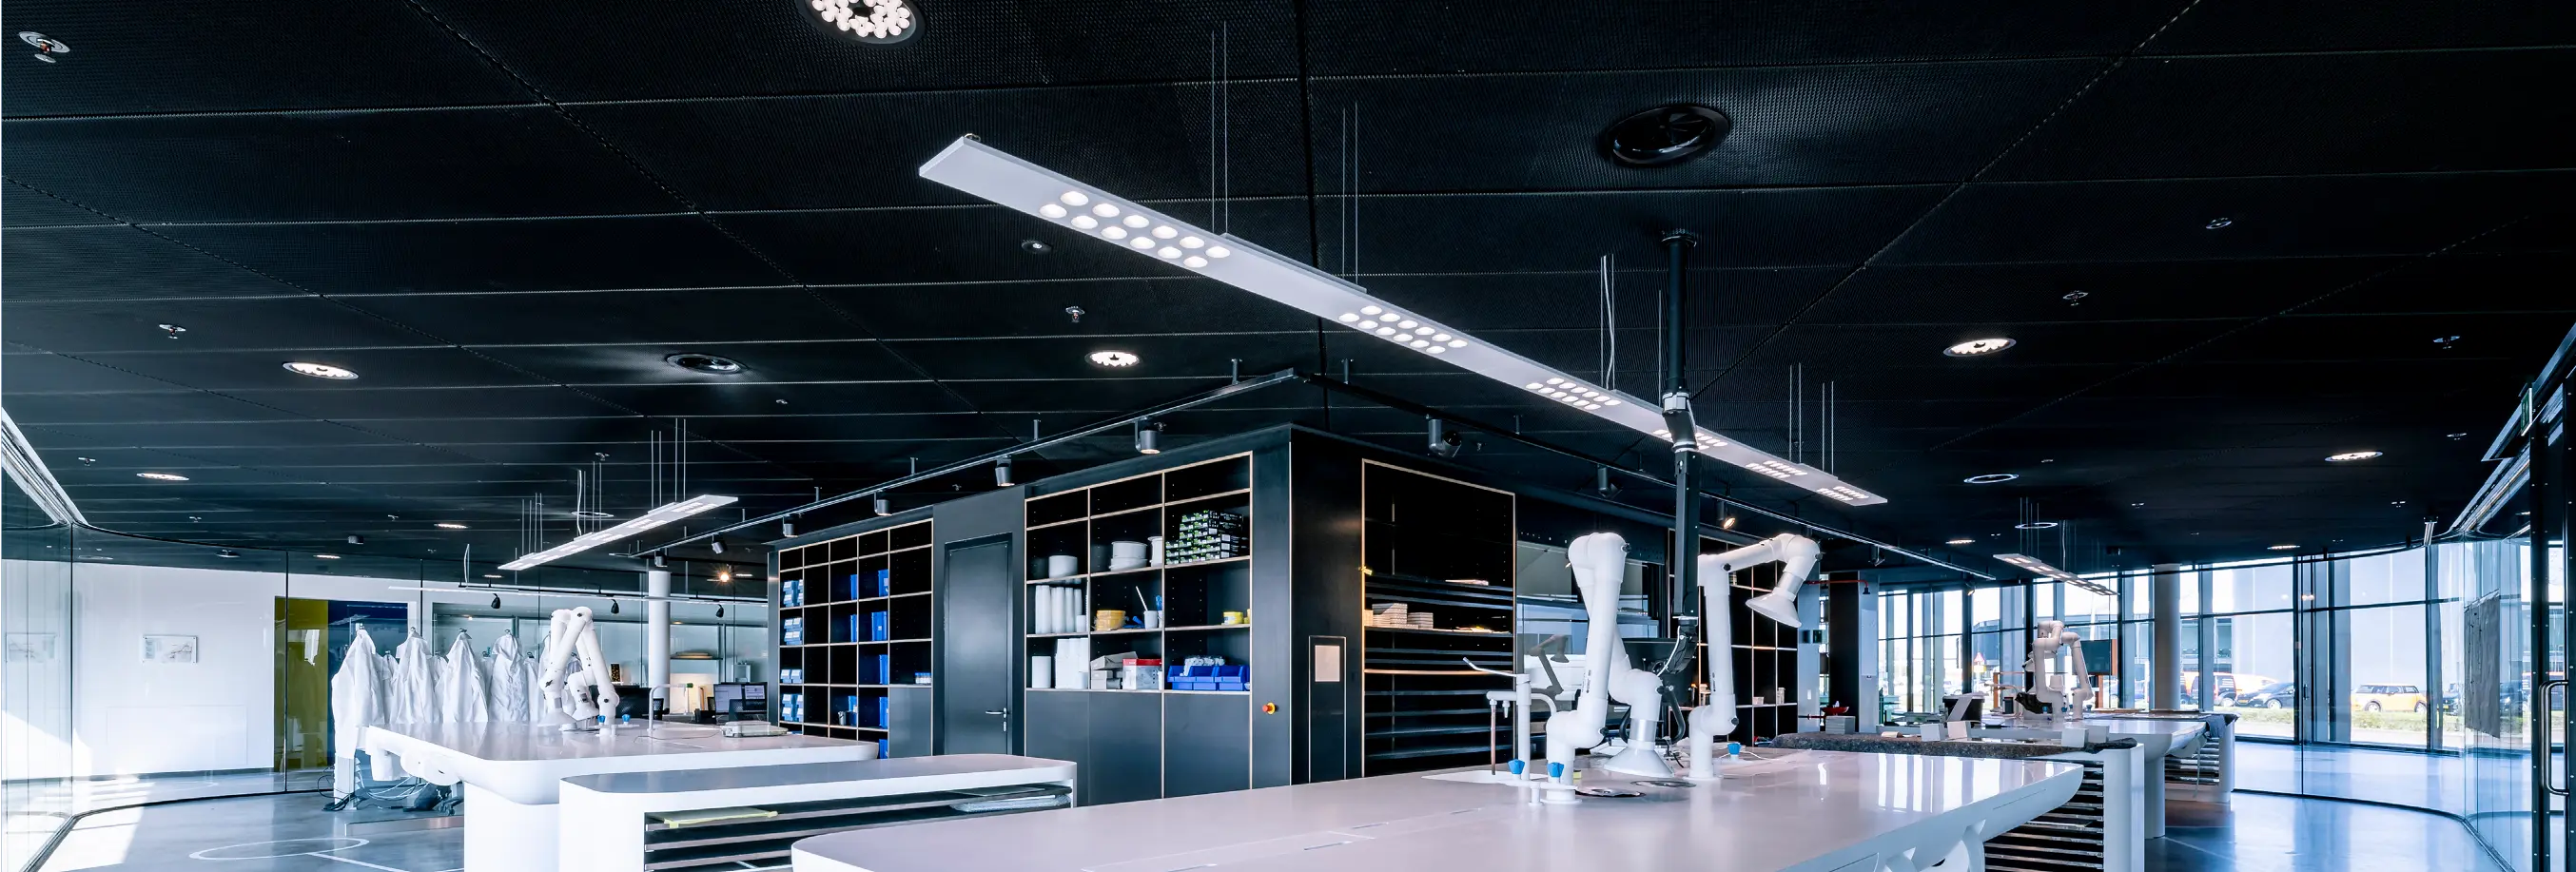 The color of D4 downlights and K9 emergency lighting was adjusted to match the black ceiling, seamlessly integrating the luminaires into the ceiling